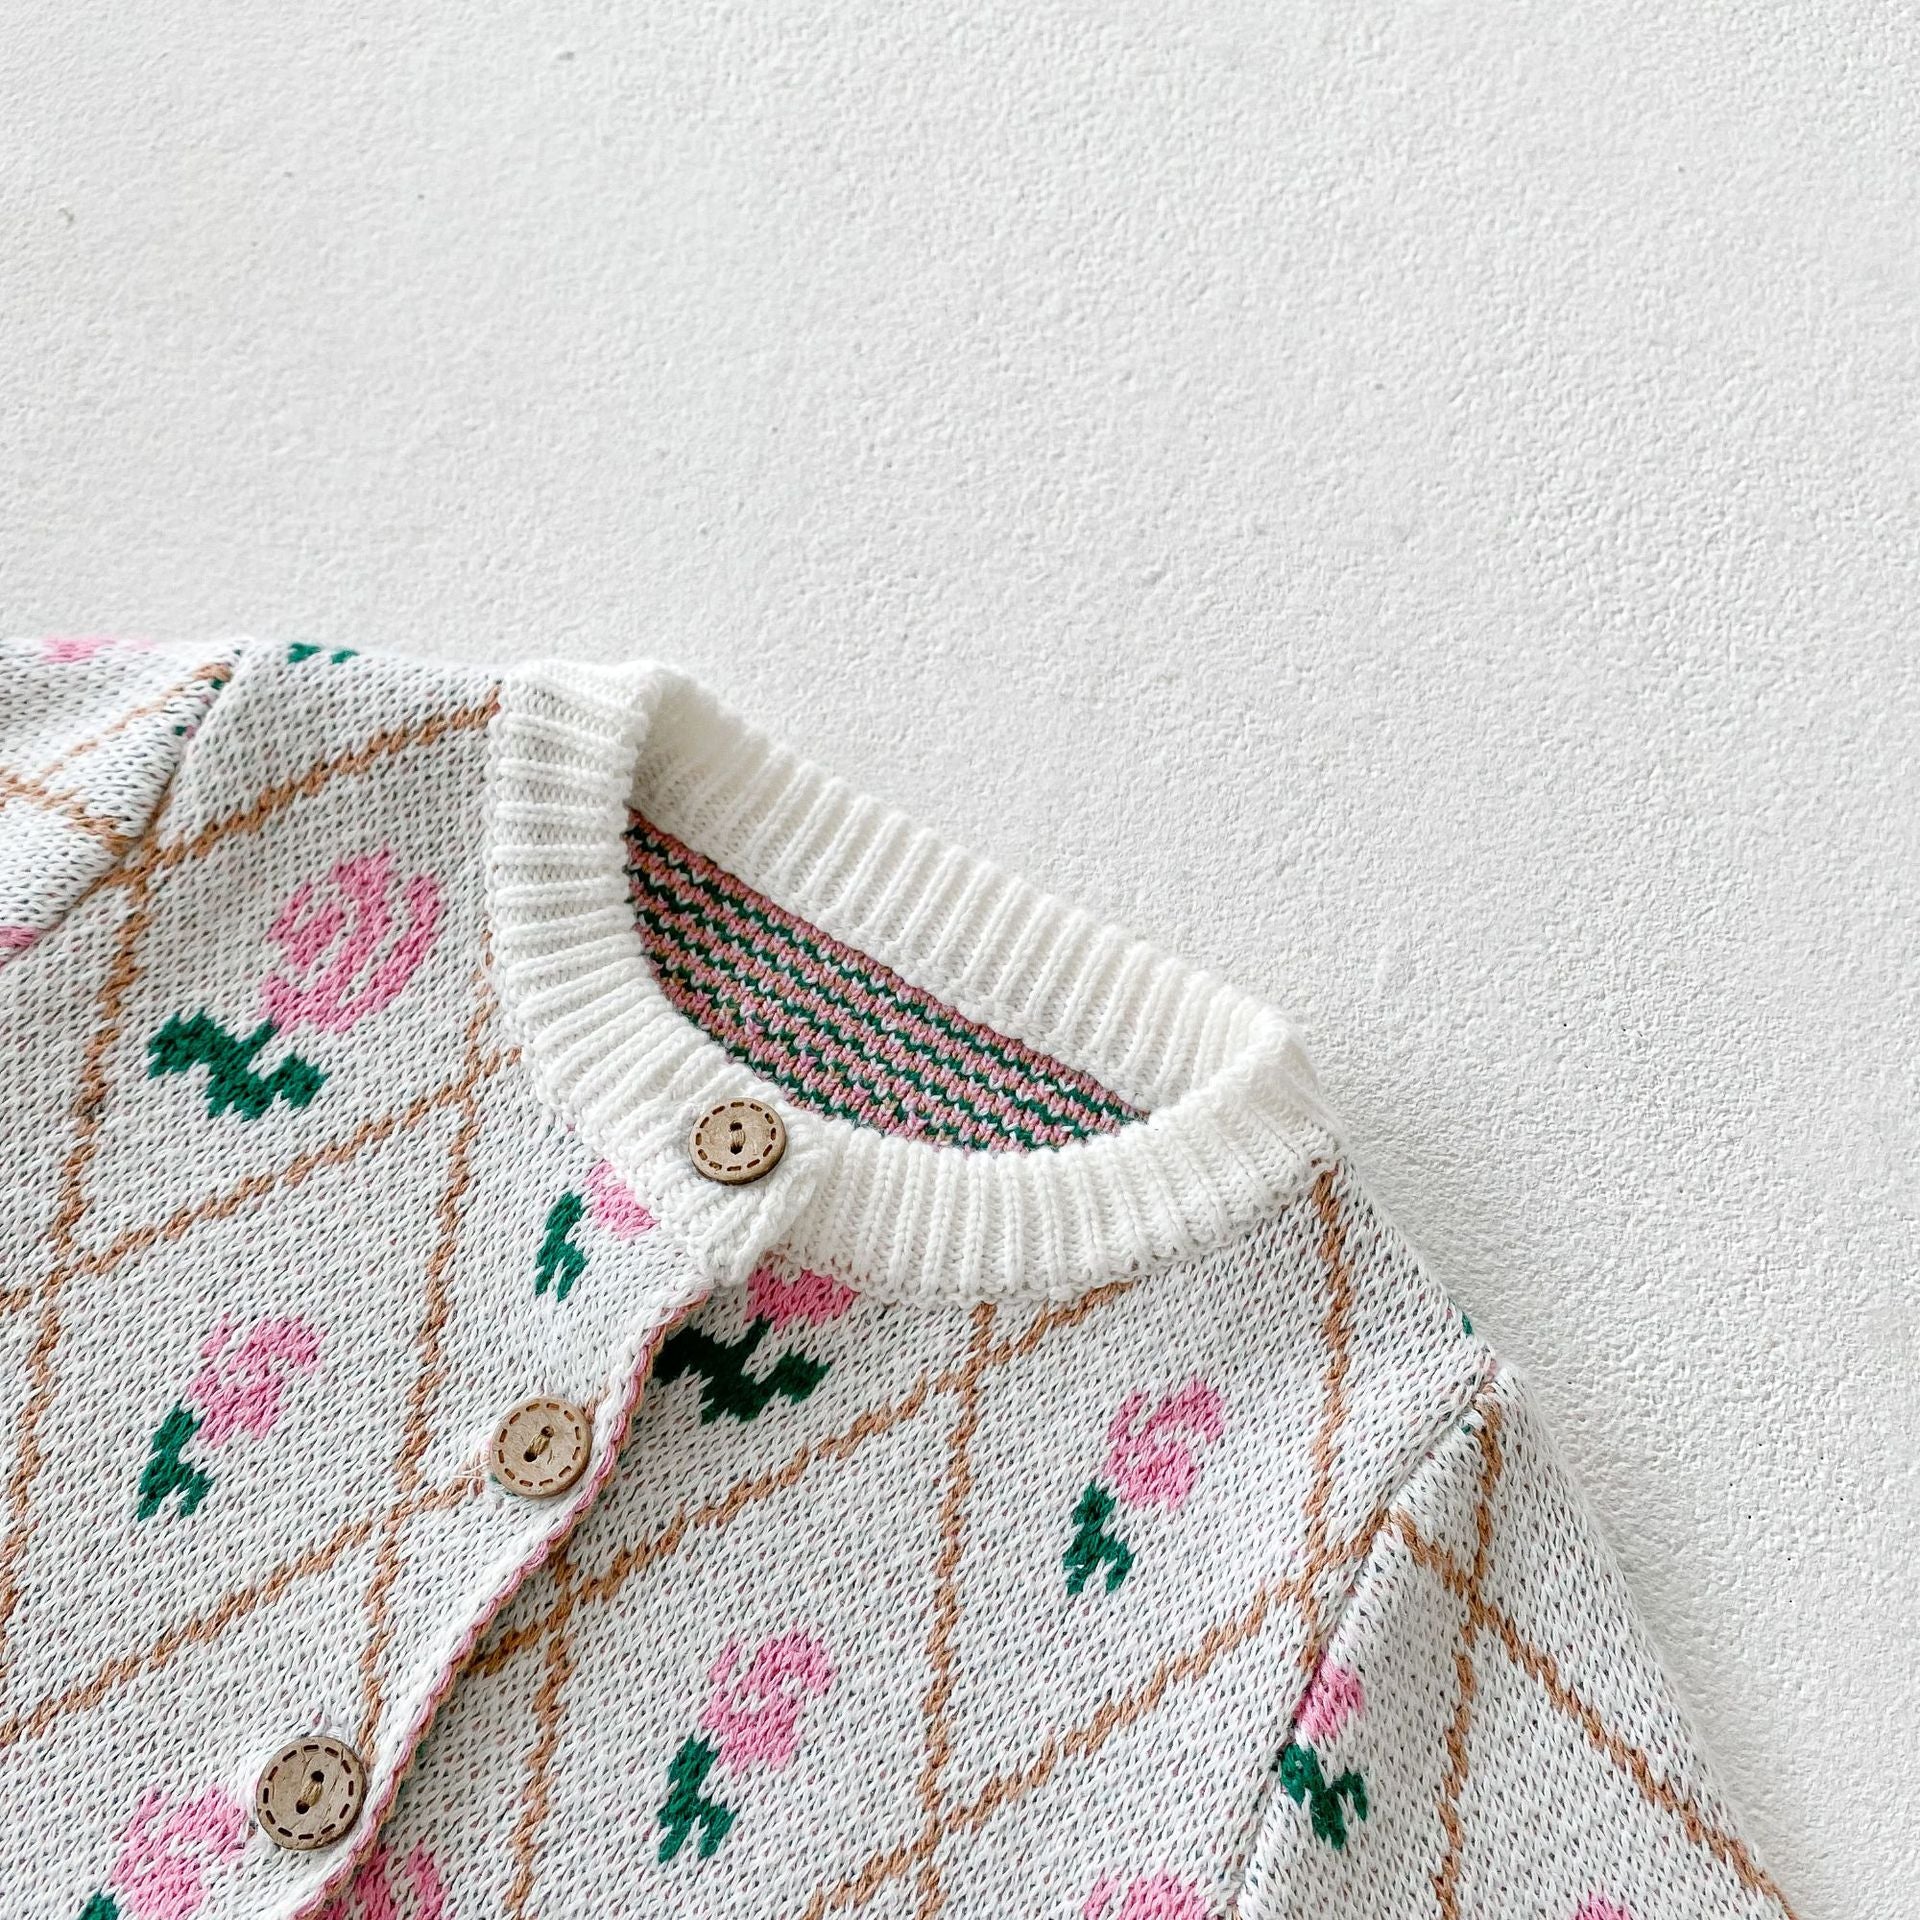 Rose knit cardigan/overalls [N2257]